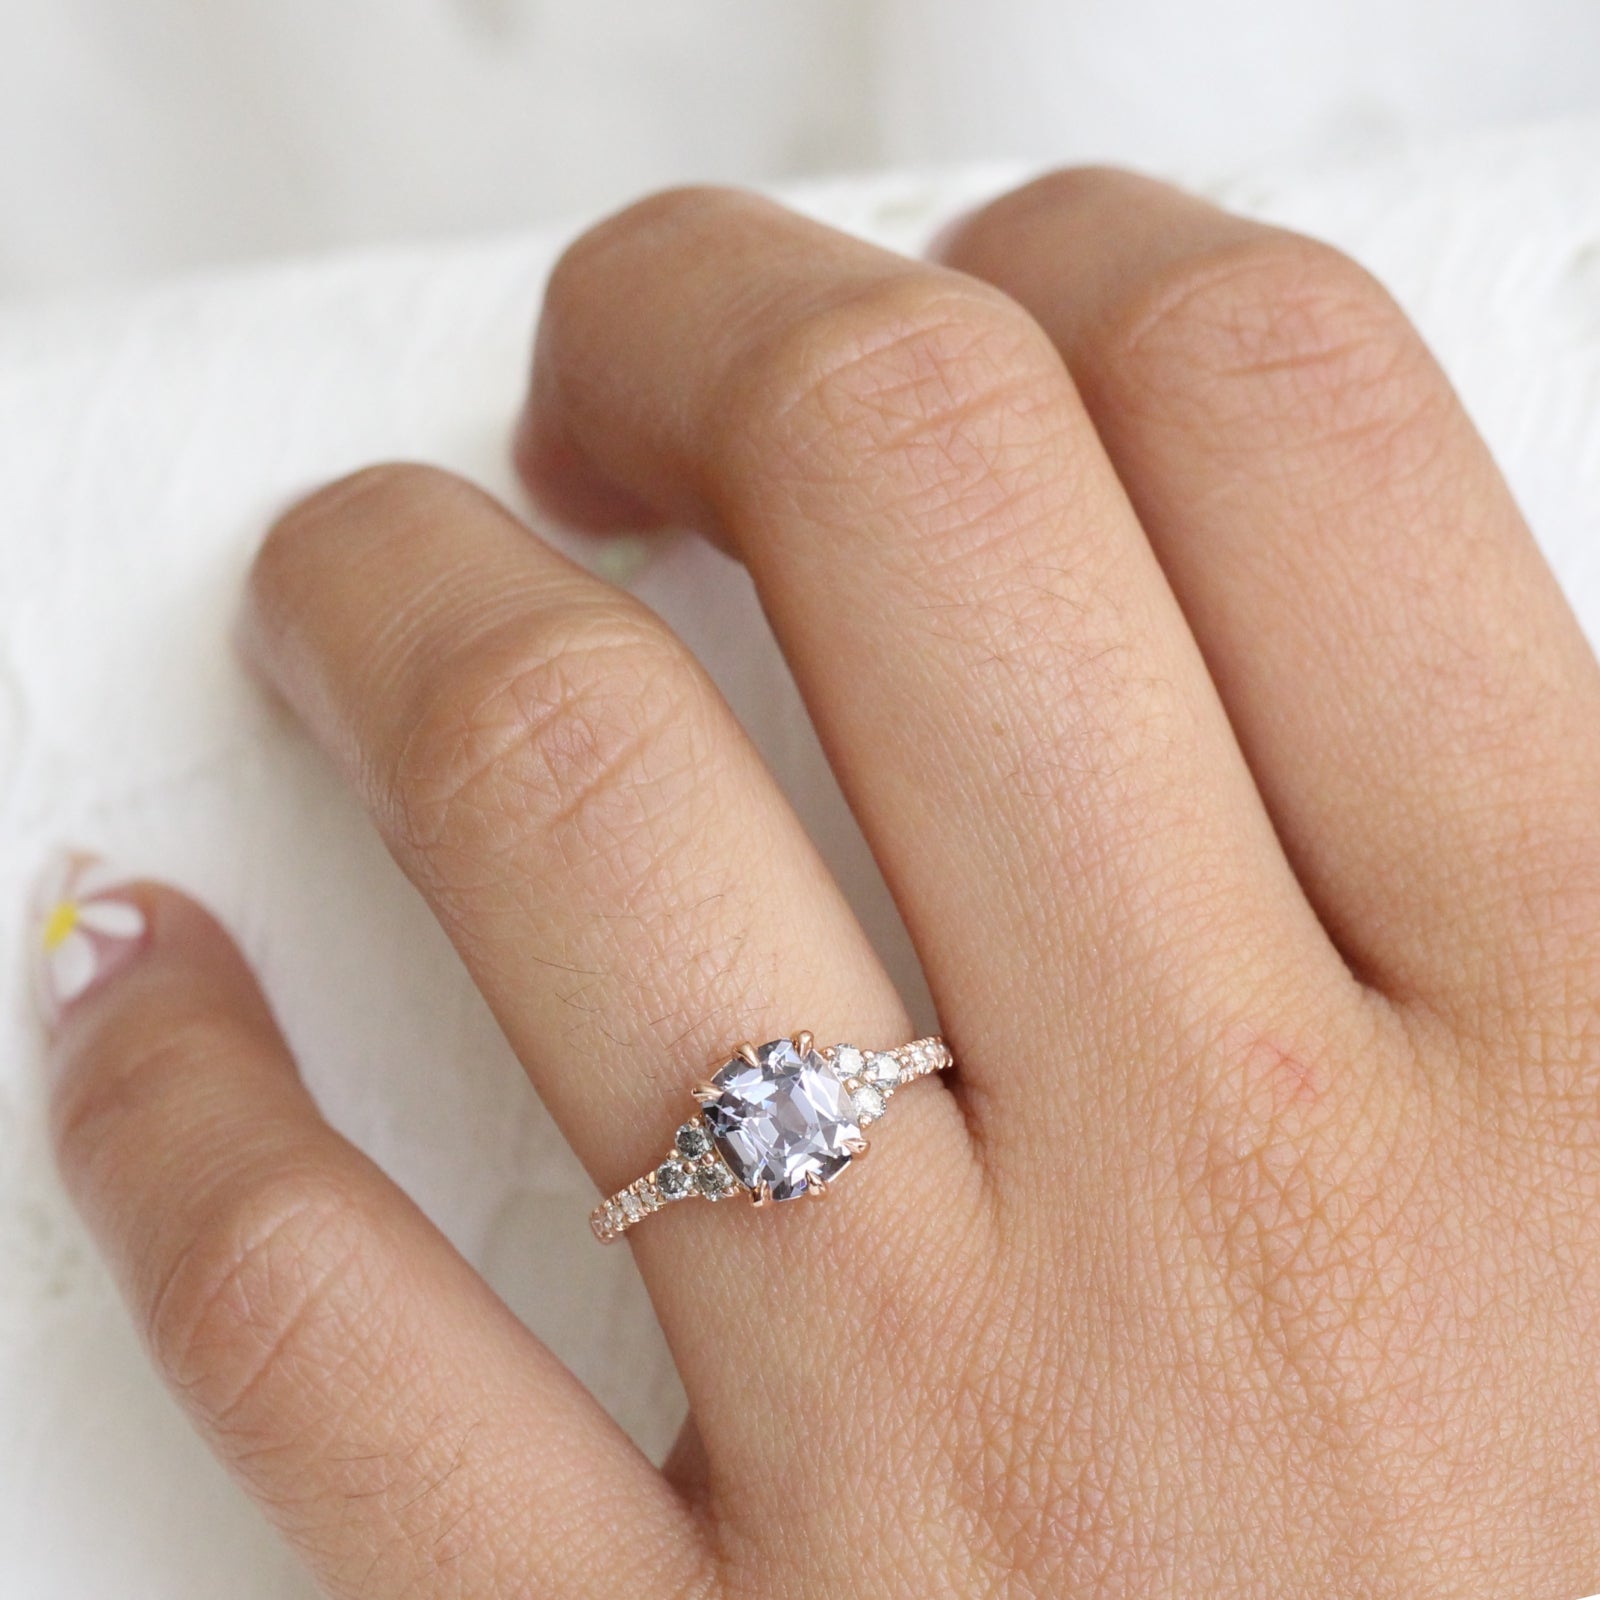 Grey Spinel Diamond Engagement Ring in Rose Gold 3 Three Stone Ring by La More Design Jewelry